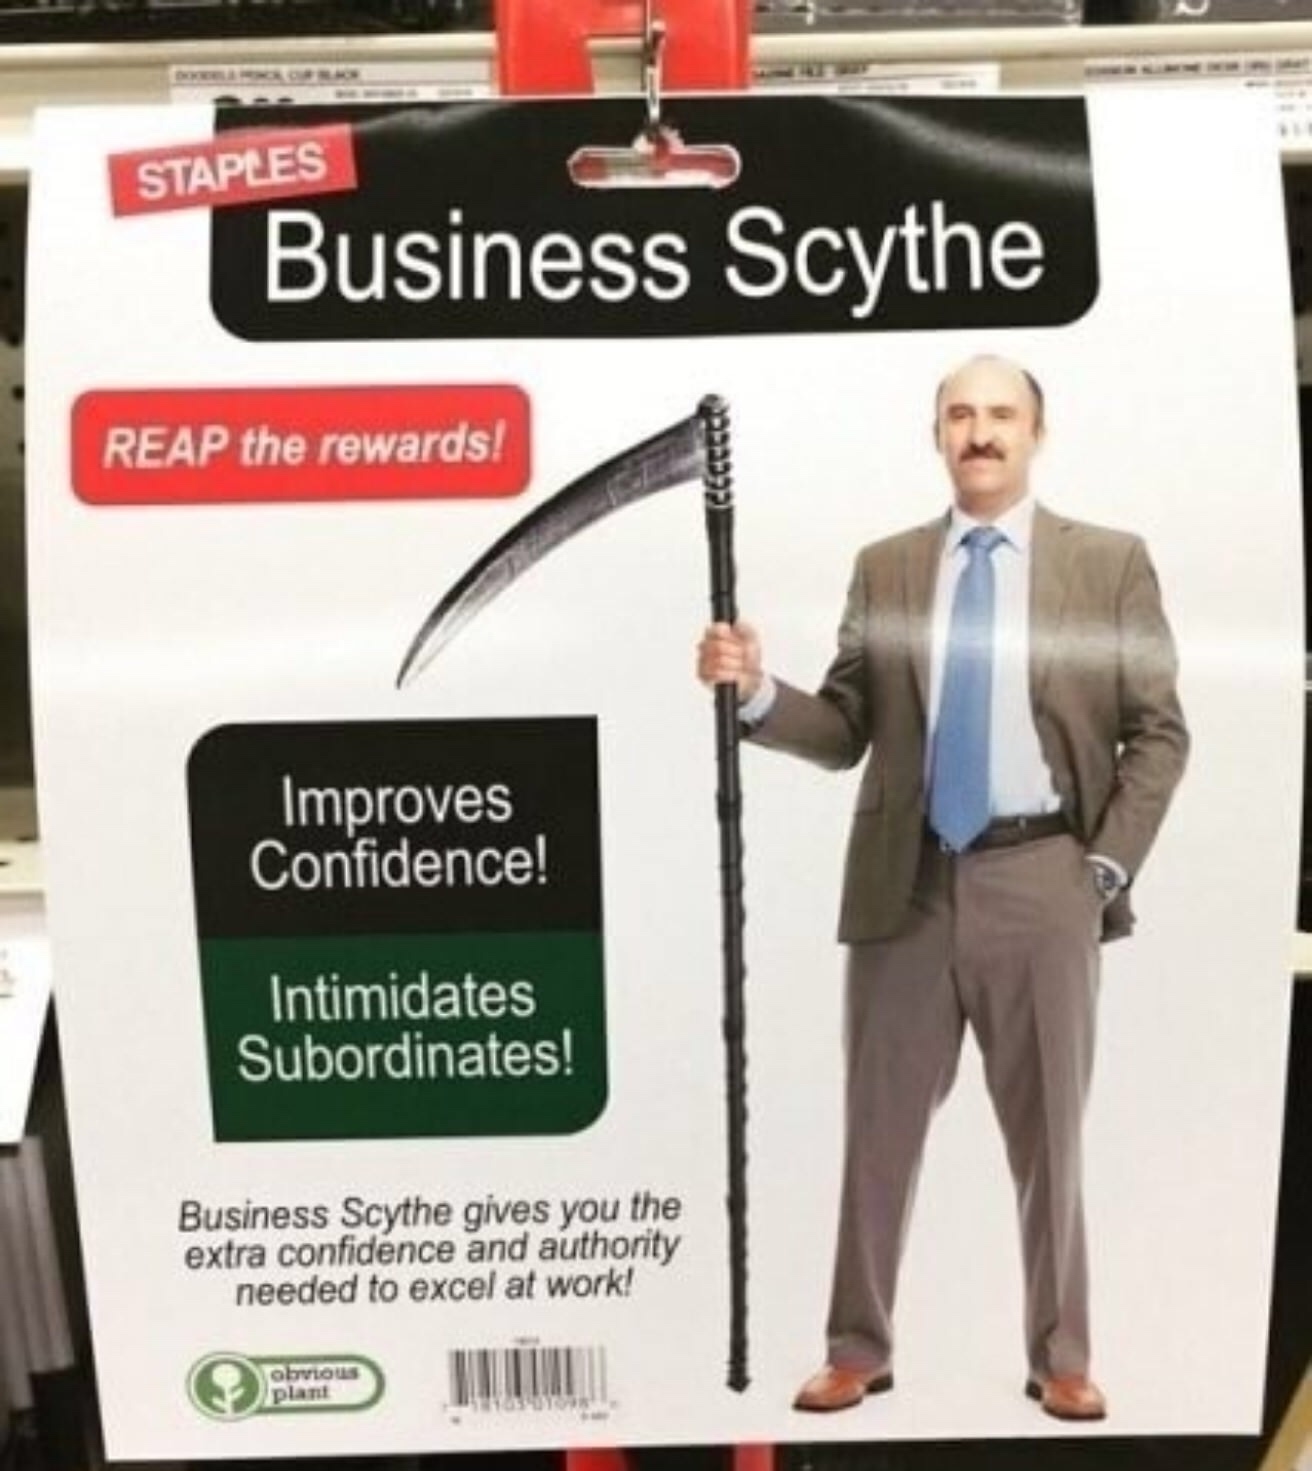 memes - staples business scythe - Staples | Business Scythe Reap the rewards! Icececce Improves Confidence! Intimidates Subordinates! Business Scythe gives you the extra confidence and authority needed to excel at work! Obous plant